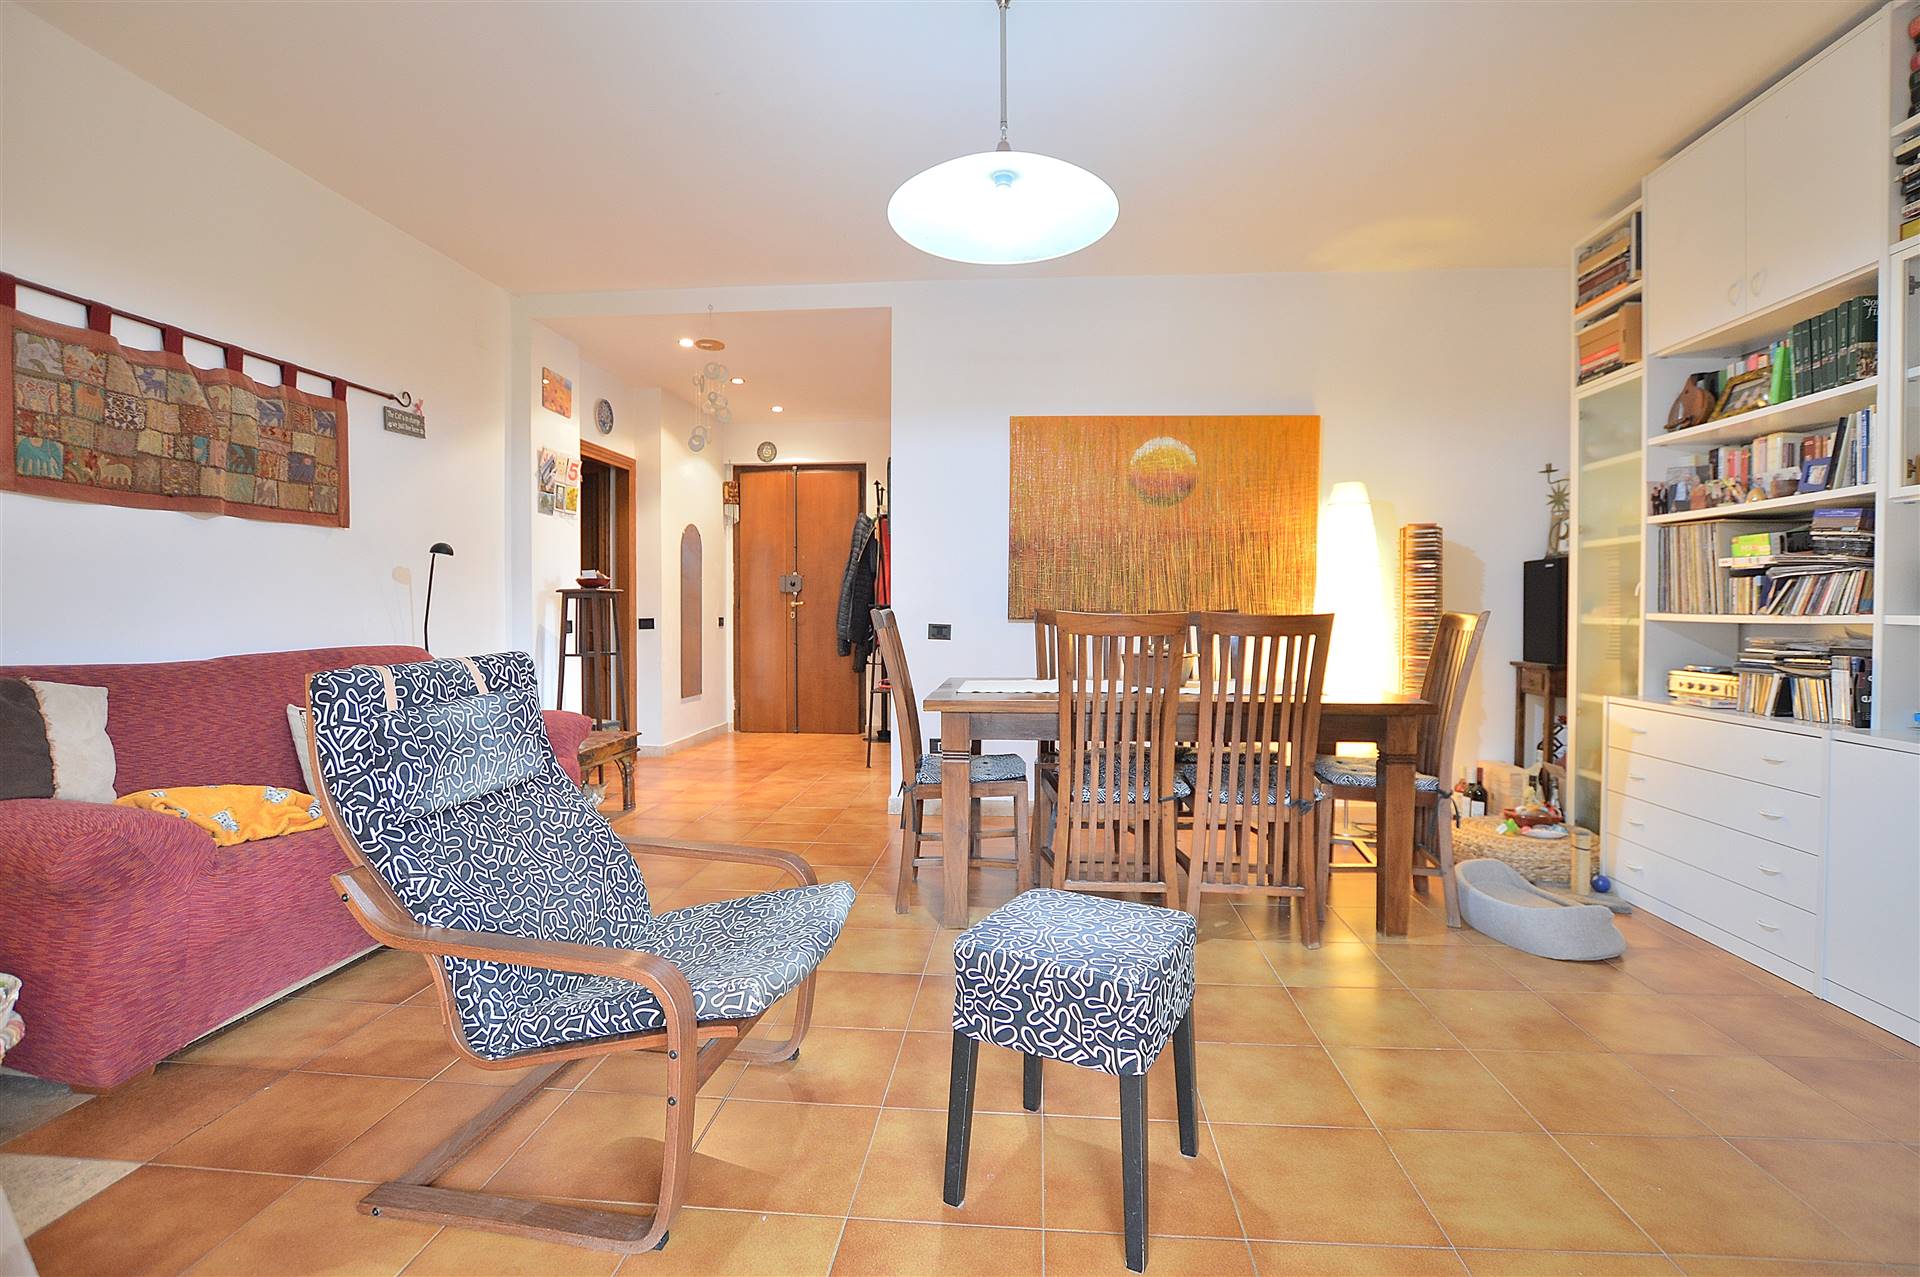 PONTE A BOZZONE, CASTELNUOVO BERARDENGA, Apartment for sale of 105 Sq. mt., Habitable, Heating Individual heating system, Energetic class: F, Epi: 